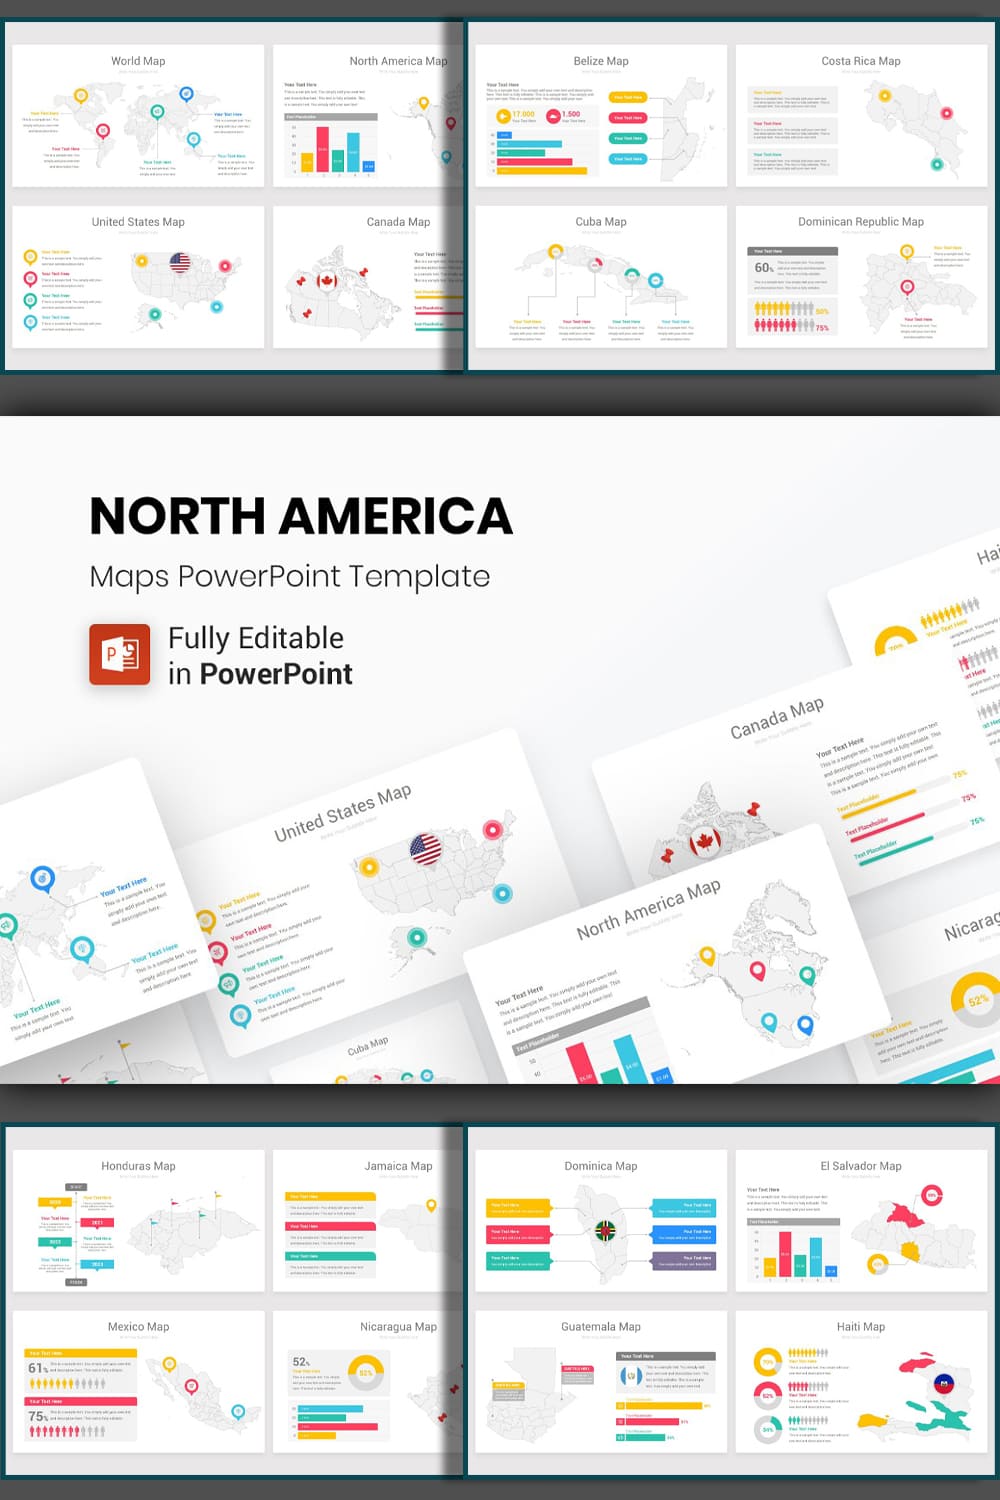 North America Maps PowerPoint Template pinterest image.